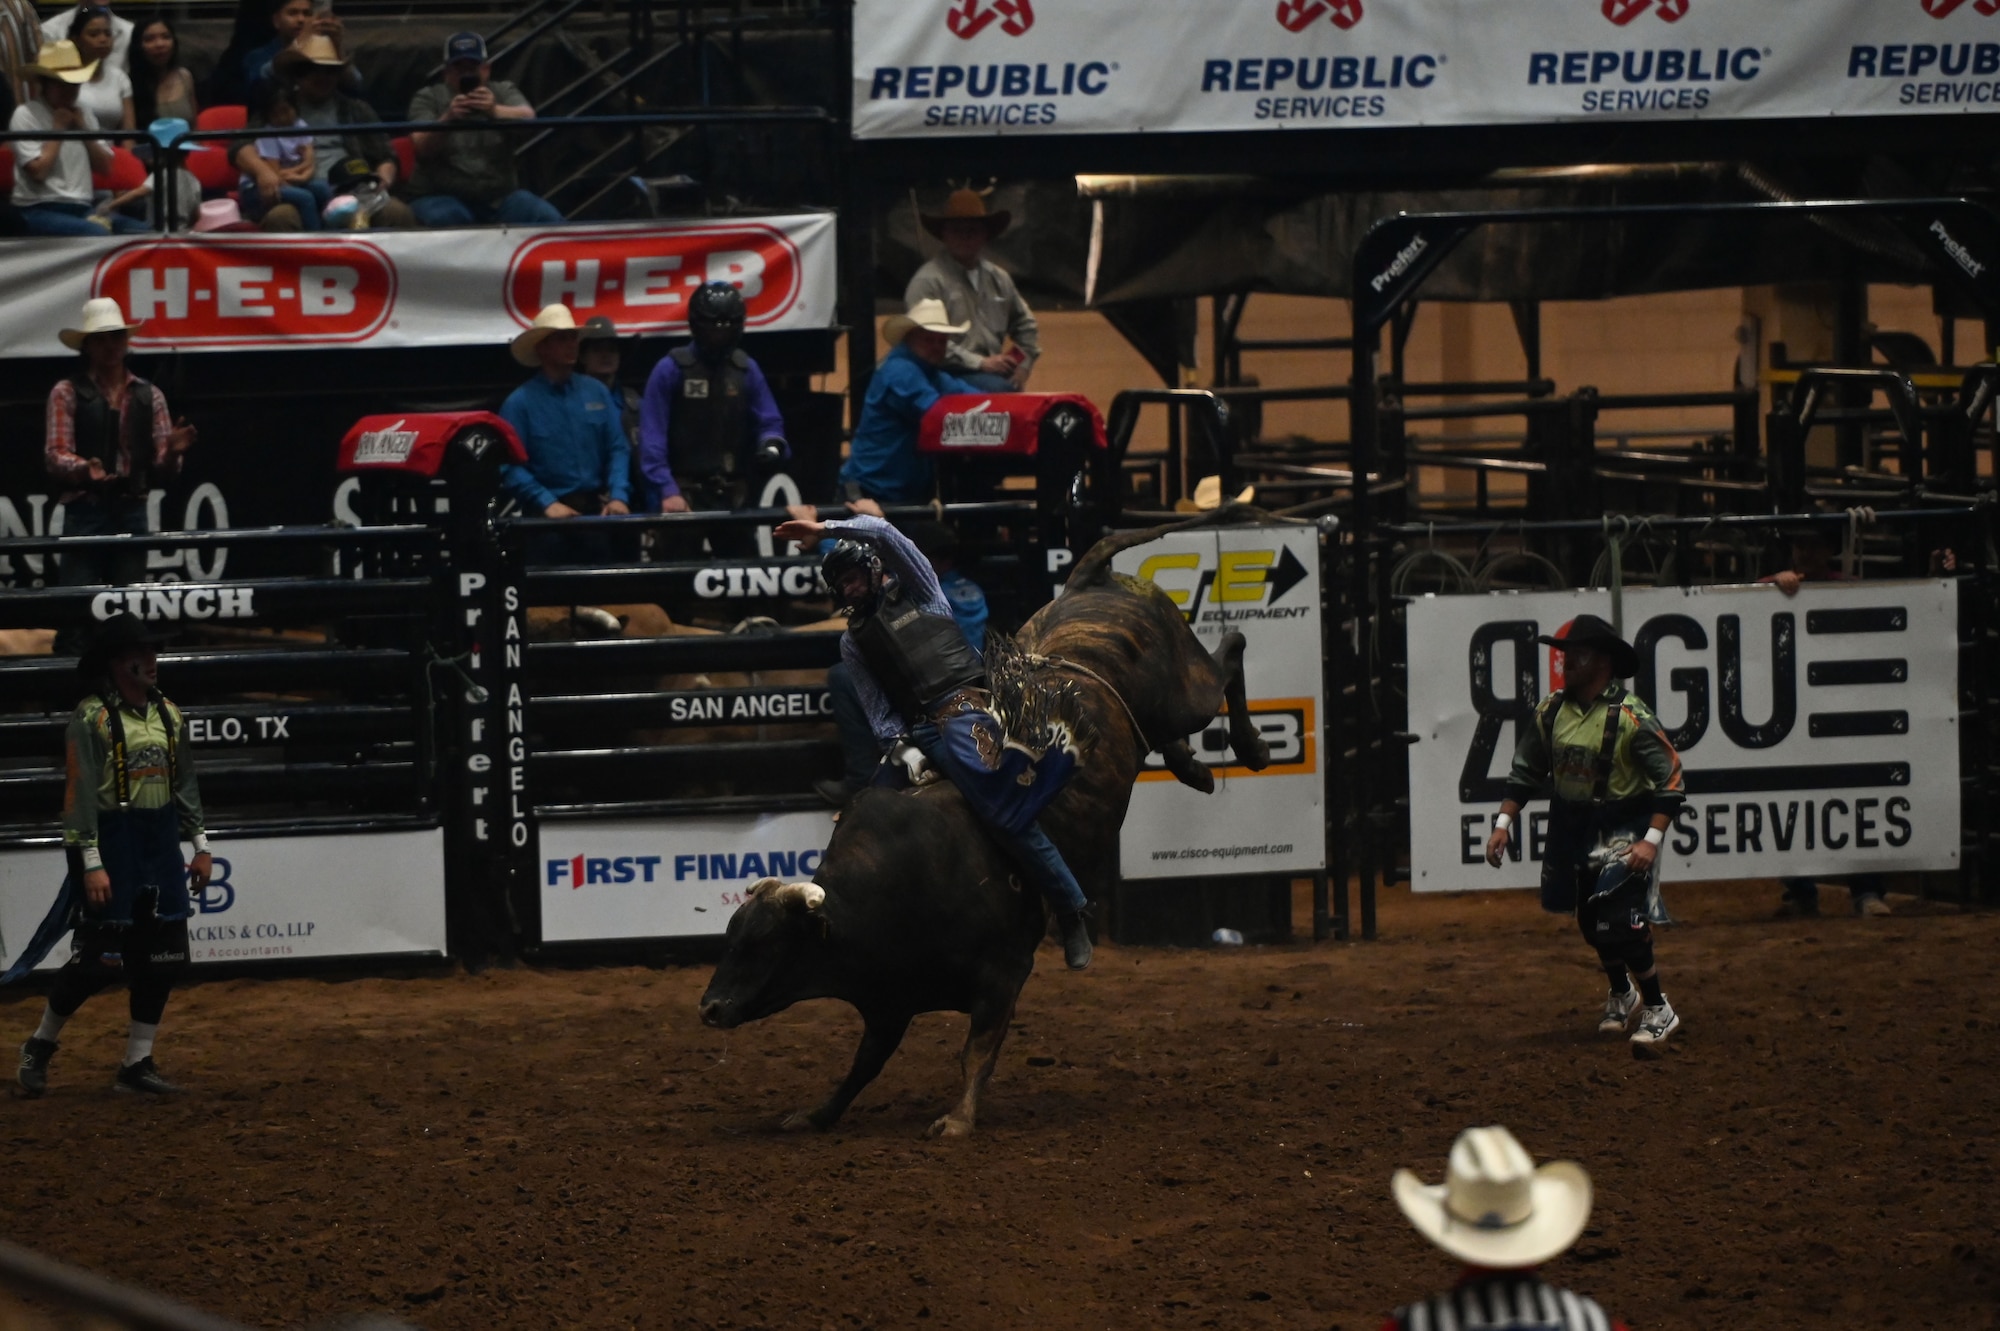 Brody Yeary, a bull rider from Morgan Mill, Texas, rides the bull, Ranger Walker, during Military Appreciation Night at the San Angelo Stock Show & Rodeo at the Foster Communications Coliseum in San Angelo, Texas, April 17, 2024. Yeary rode Ranger Walker for over 8 seconds and finished the night with a score of 84. (U.S. Air Force photo by Airman 1st Class Brian Lummus)